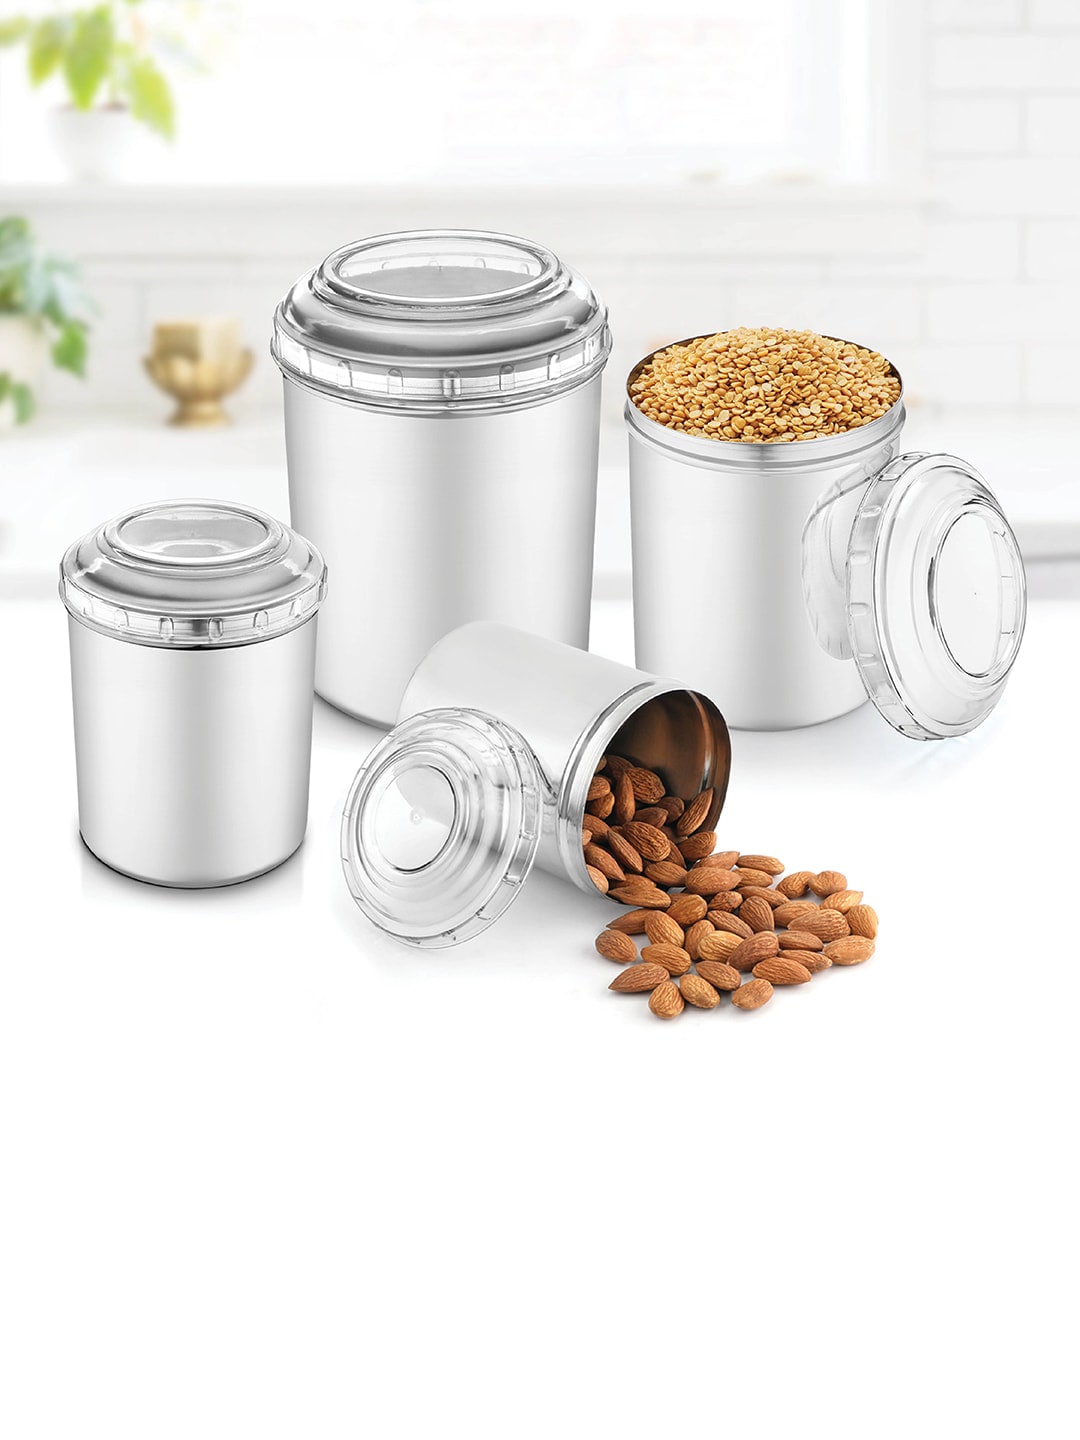 Jensons Set Of 12 Silver-Toned & Transparent Solid Stainless Steel Canisters Price in India